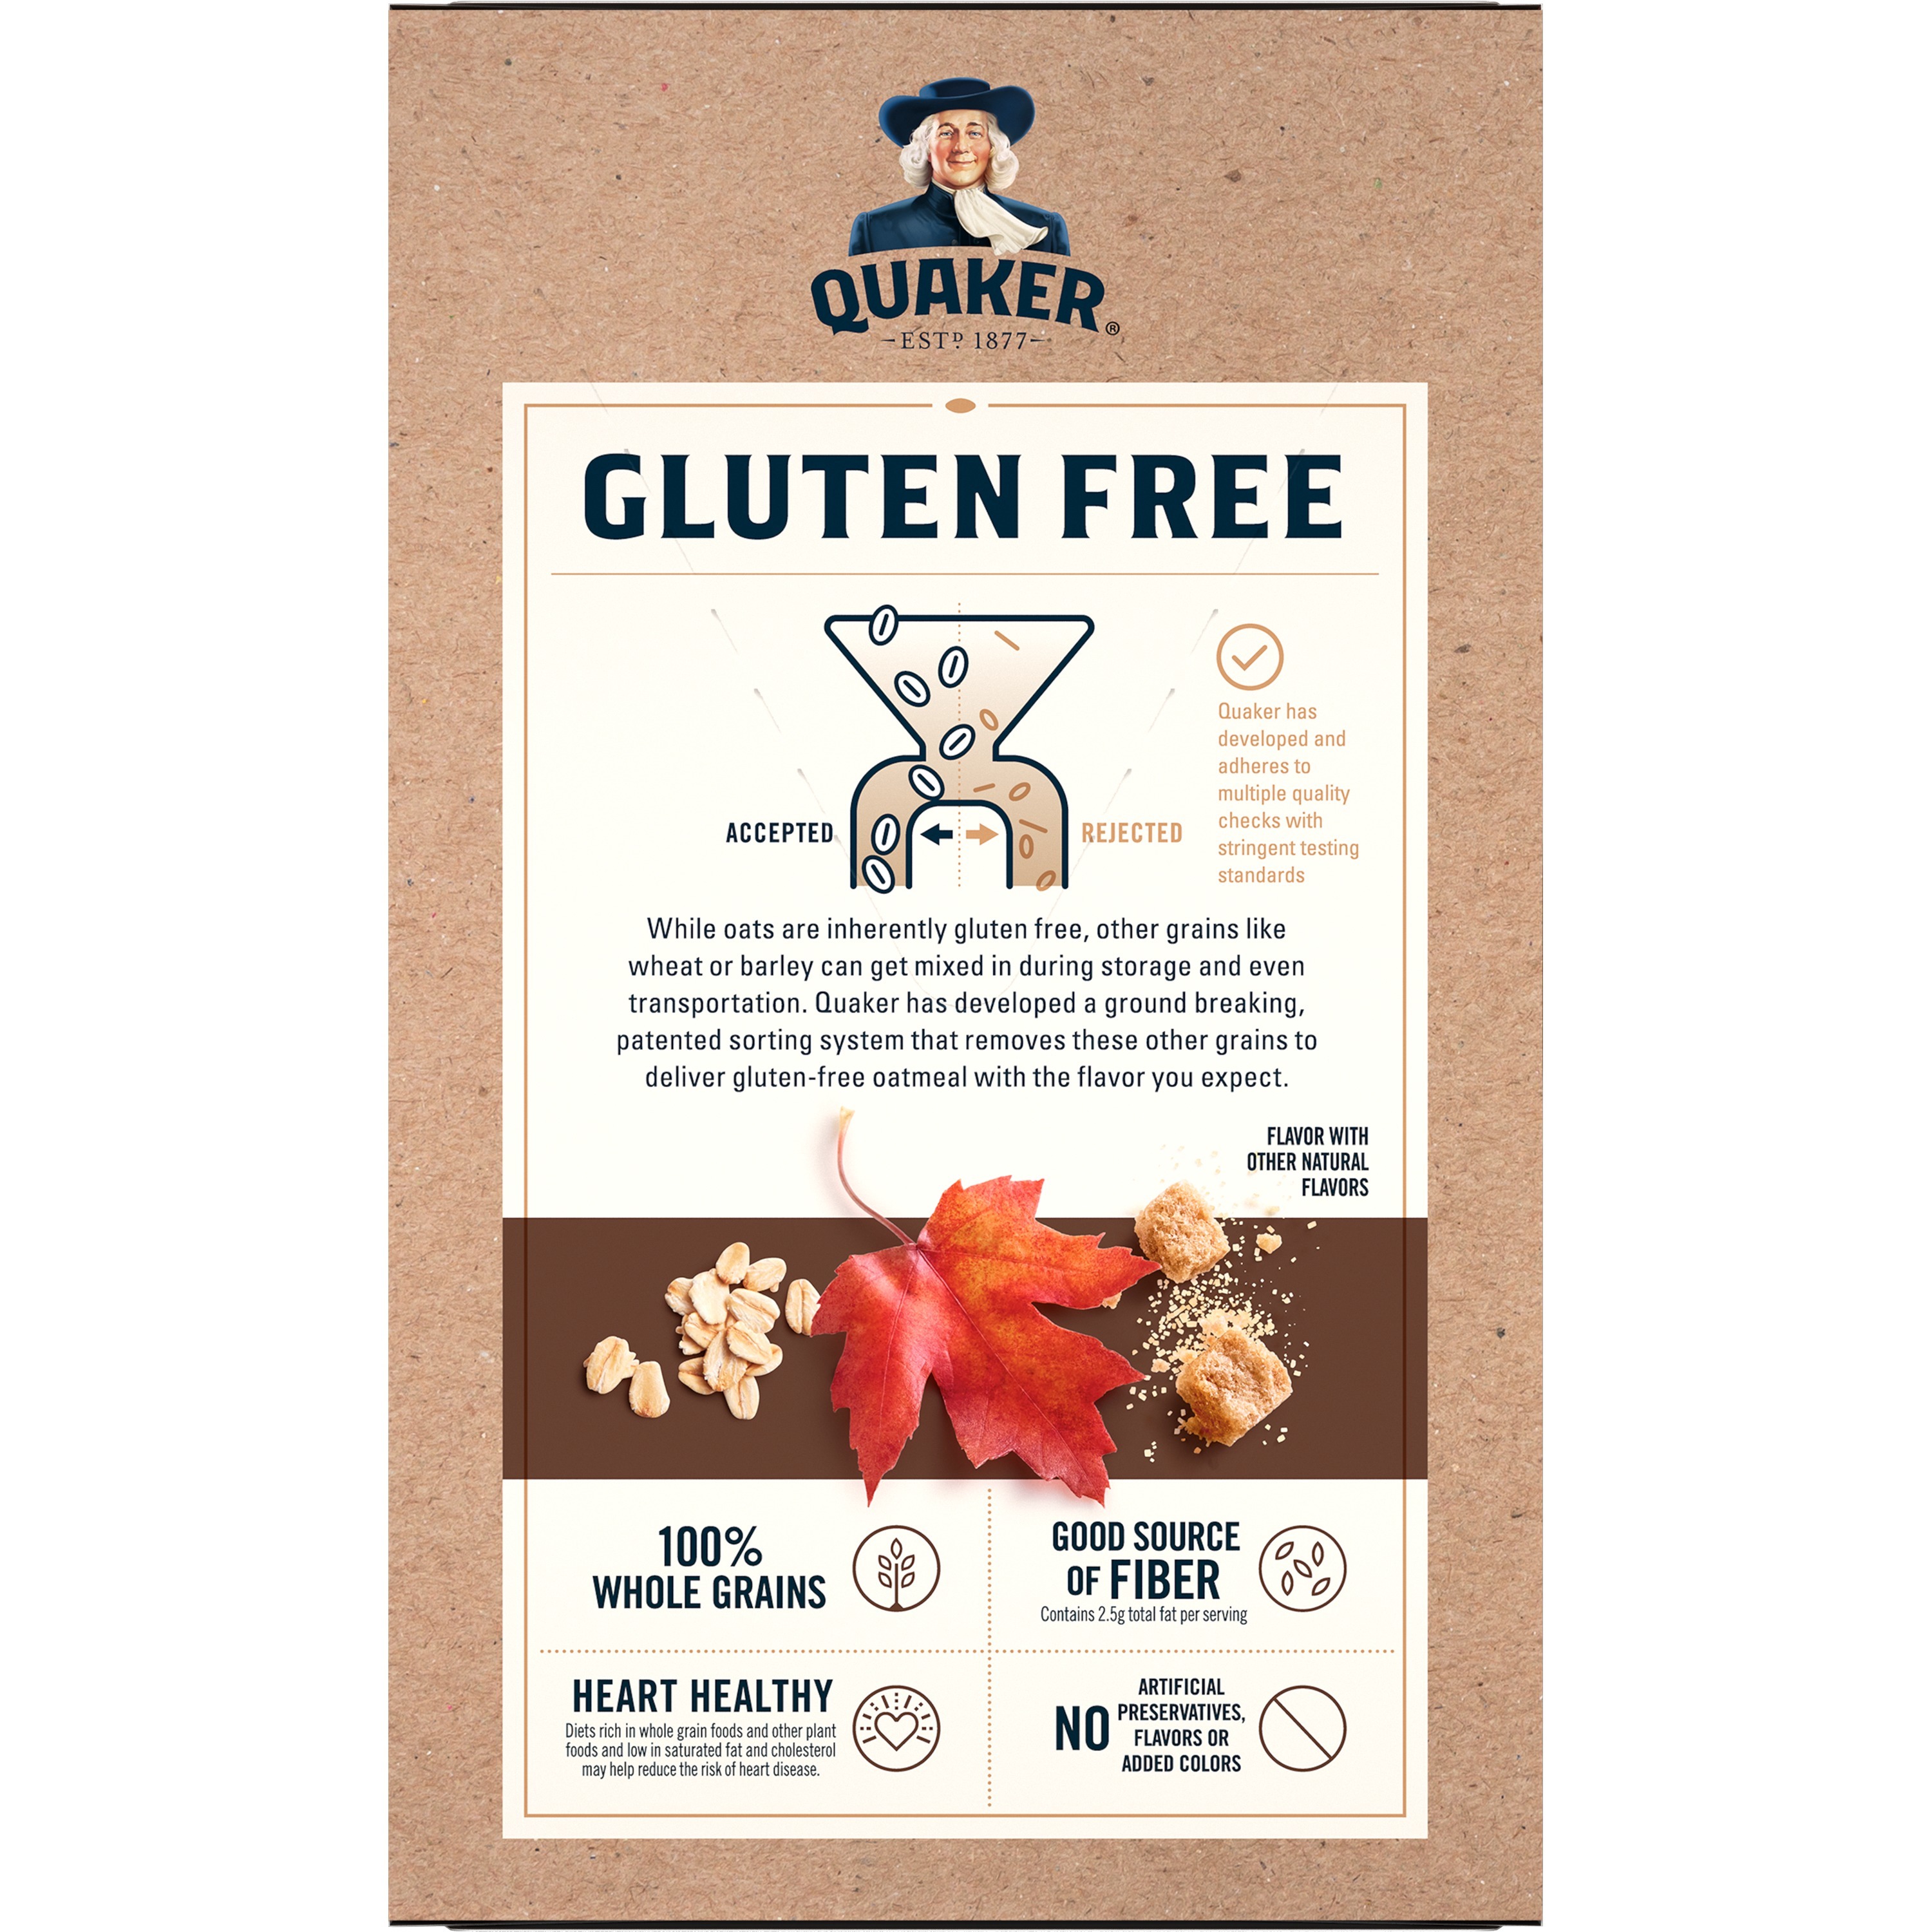 Quaker, Instant Oatmeal, Gluten Free, Maple & Brown Sugar, 1.51 oz, 8 Packets - image 5 of 13